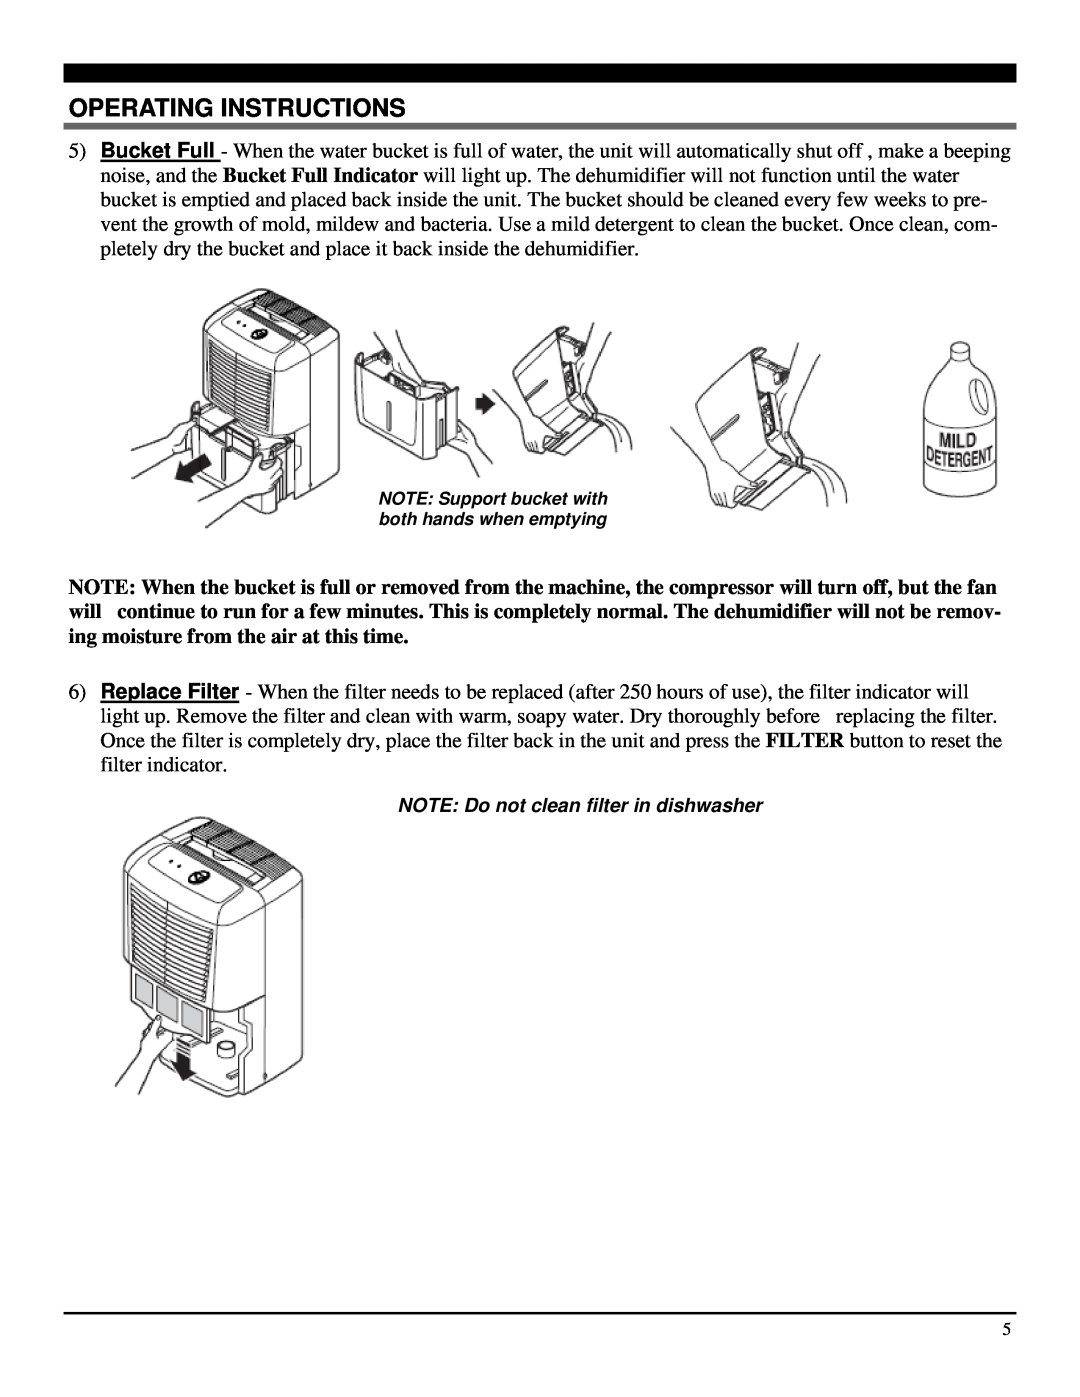 Soleus Air SG-DEH-25M-1 manual Operating Instructions, NOTE Do not clean filter in dishwasher 